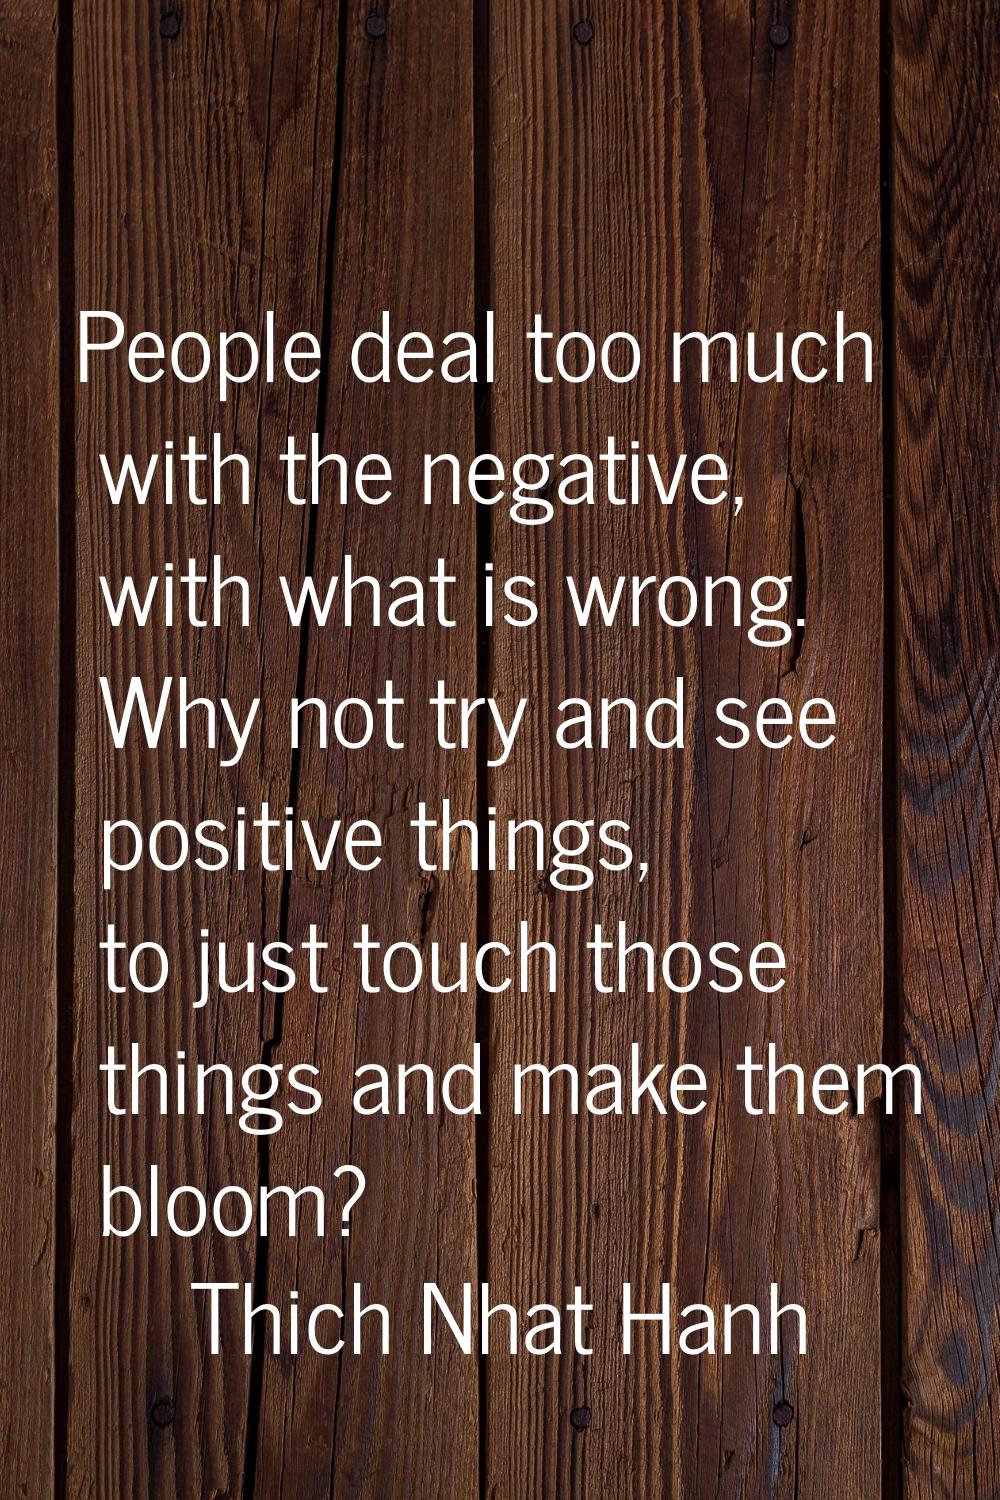 People deal too much with the negative, with what is wrong. Why not try and see positive things, to